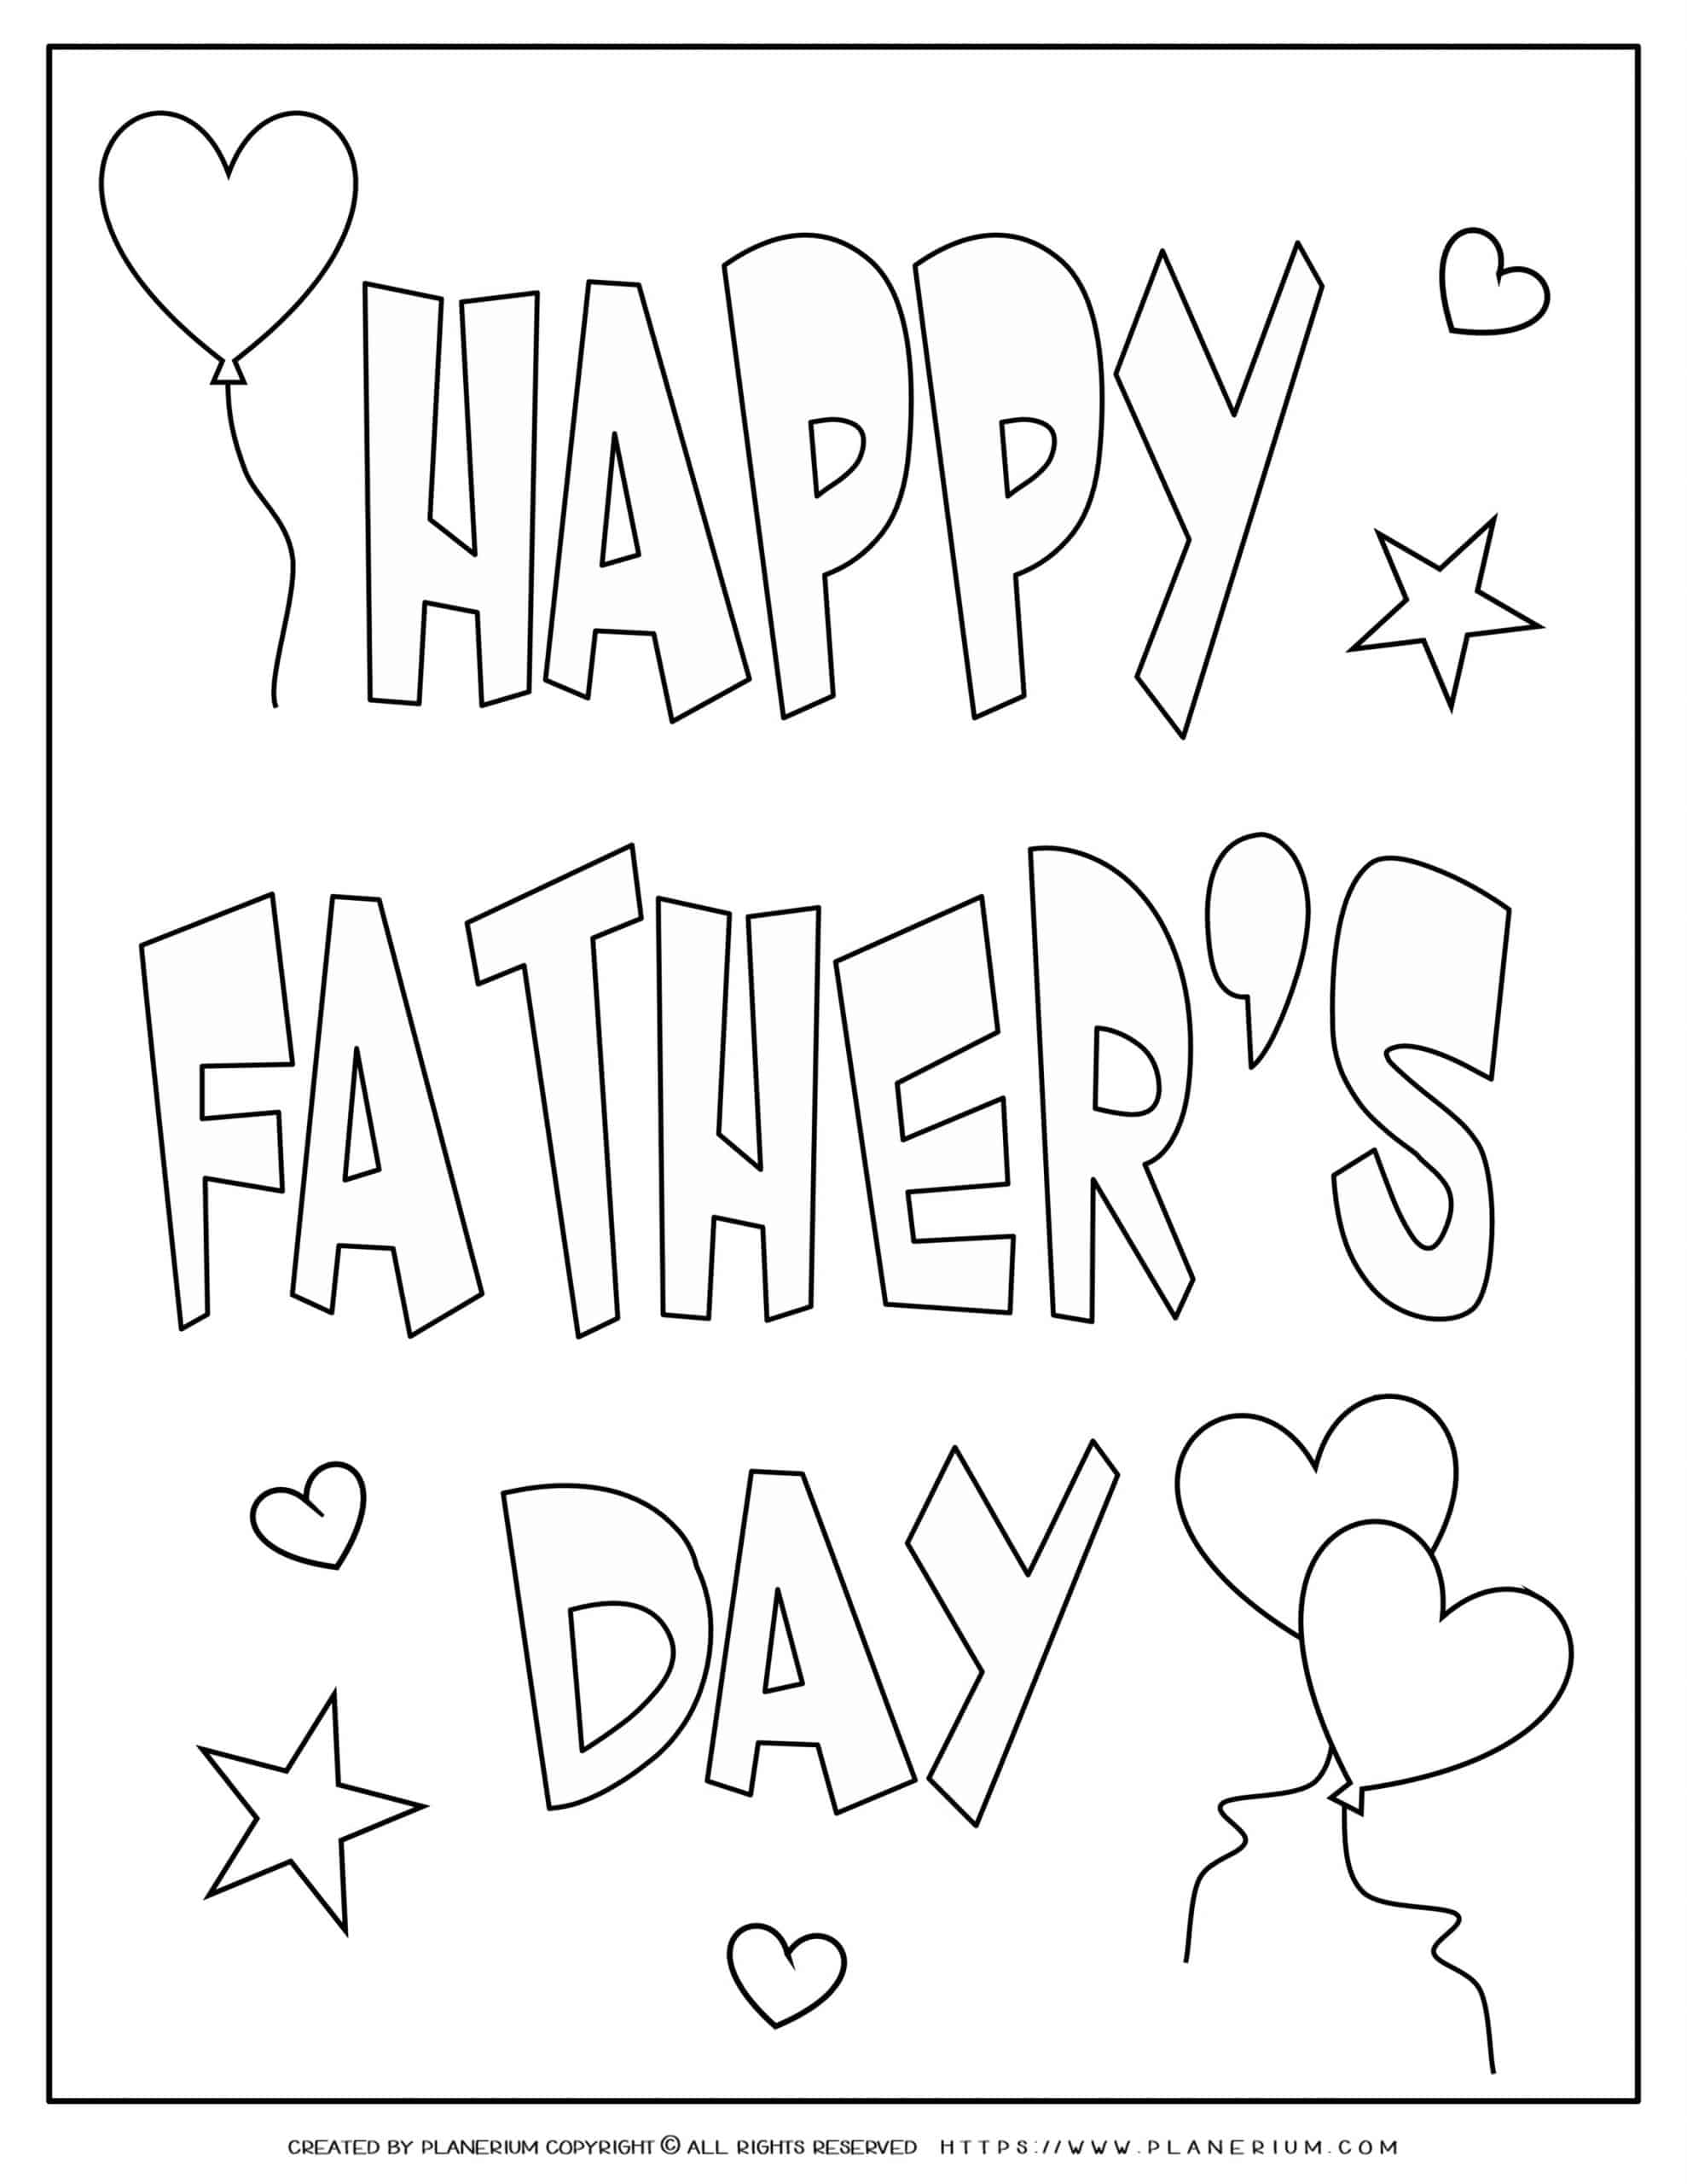 father-s-day-free-printable-cards-paper-trail-design